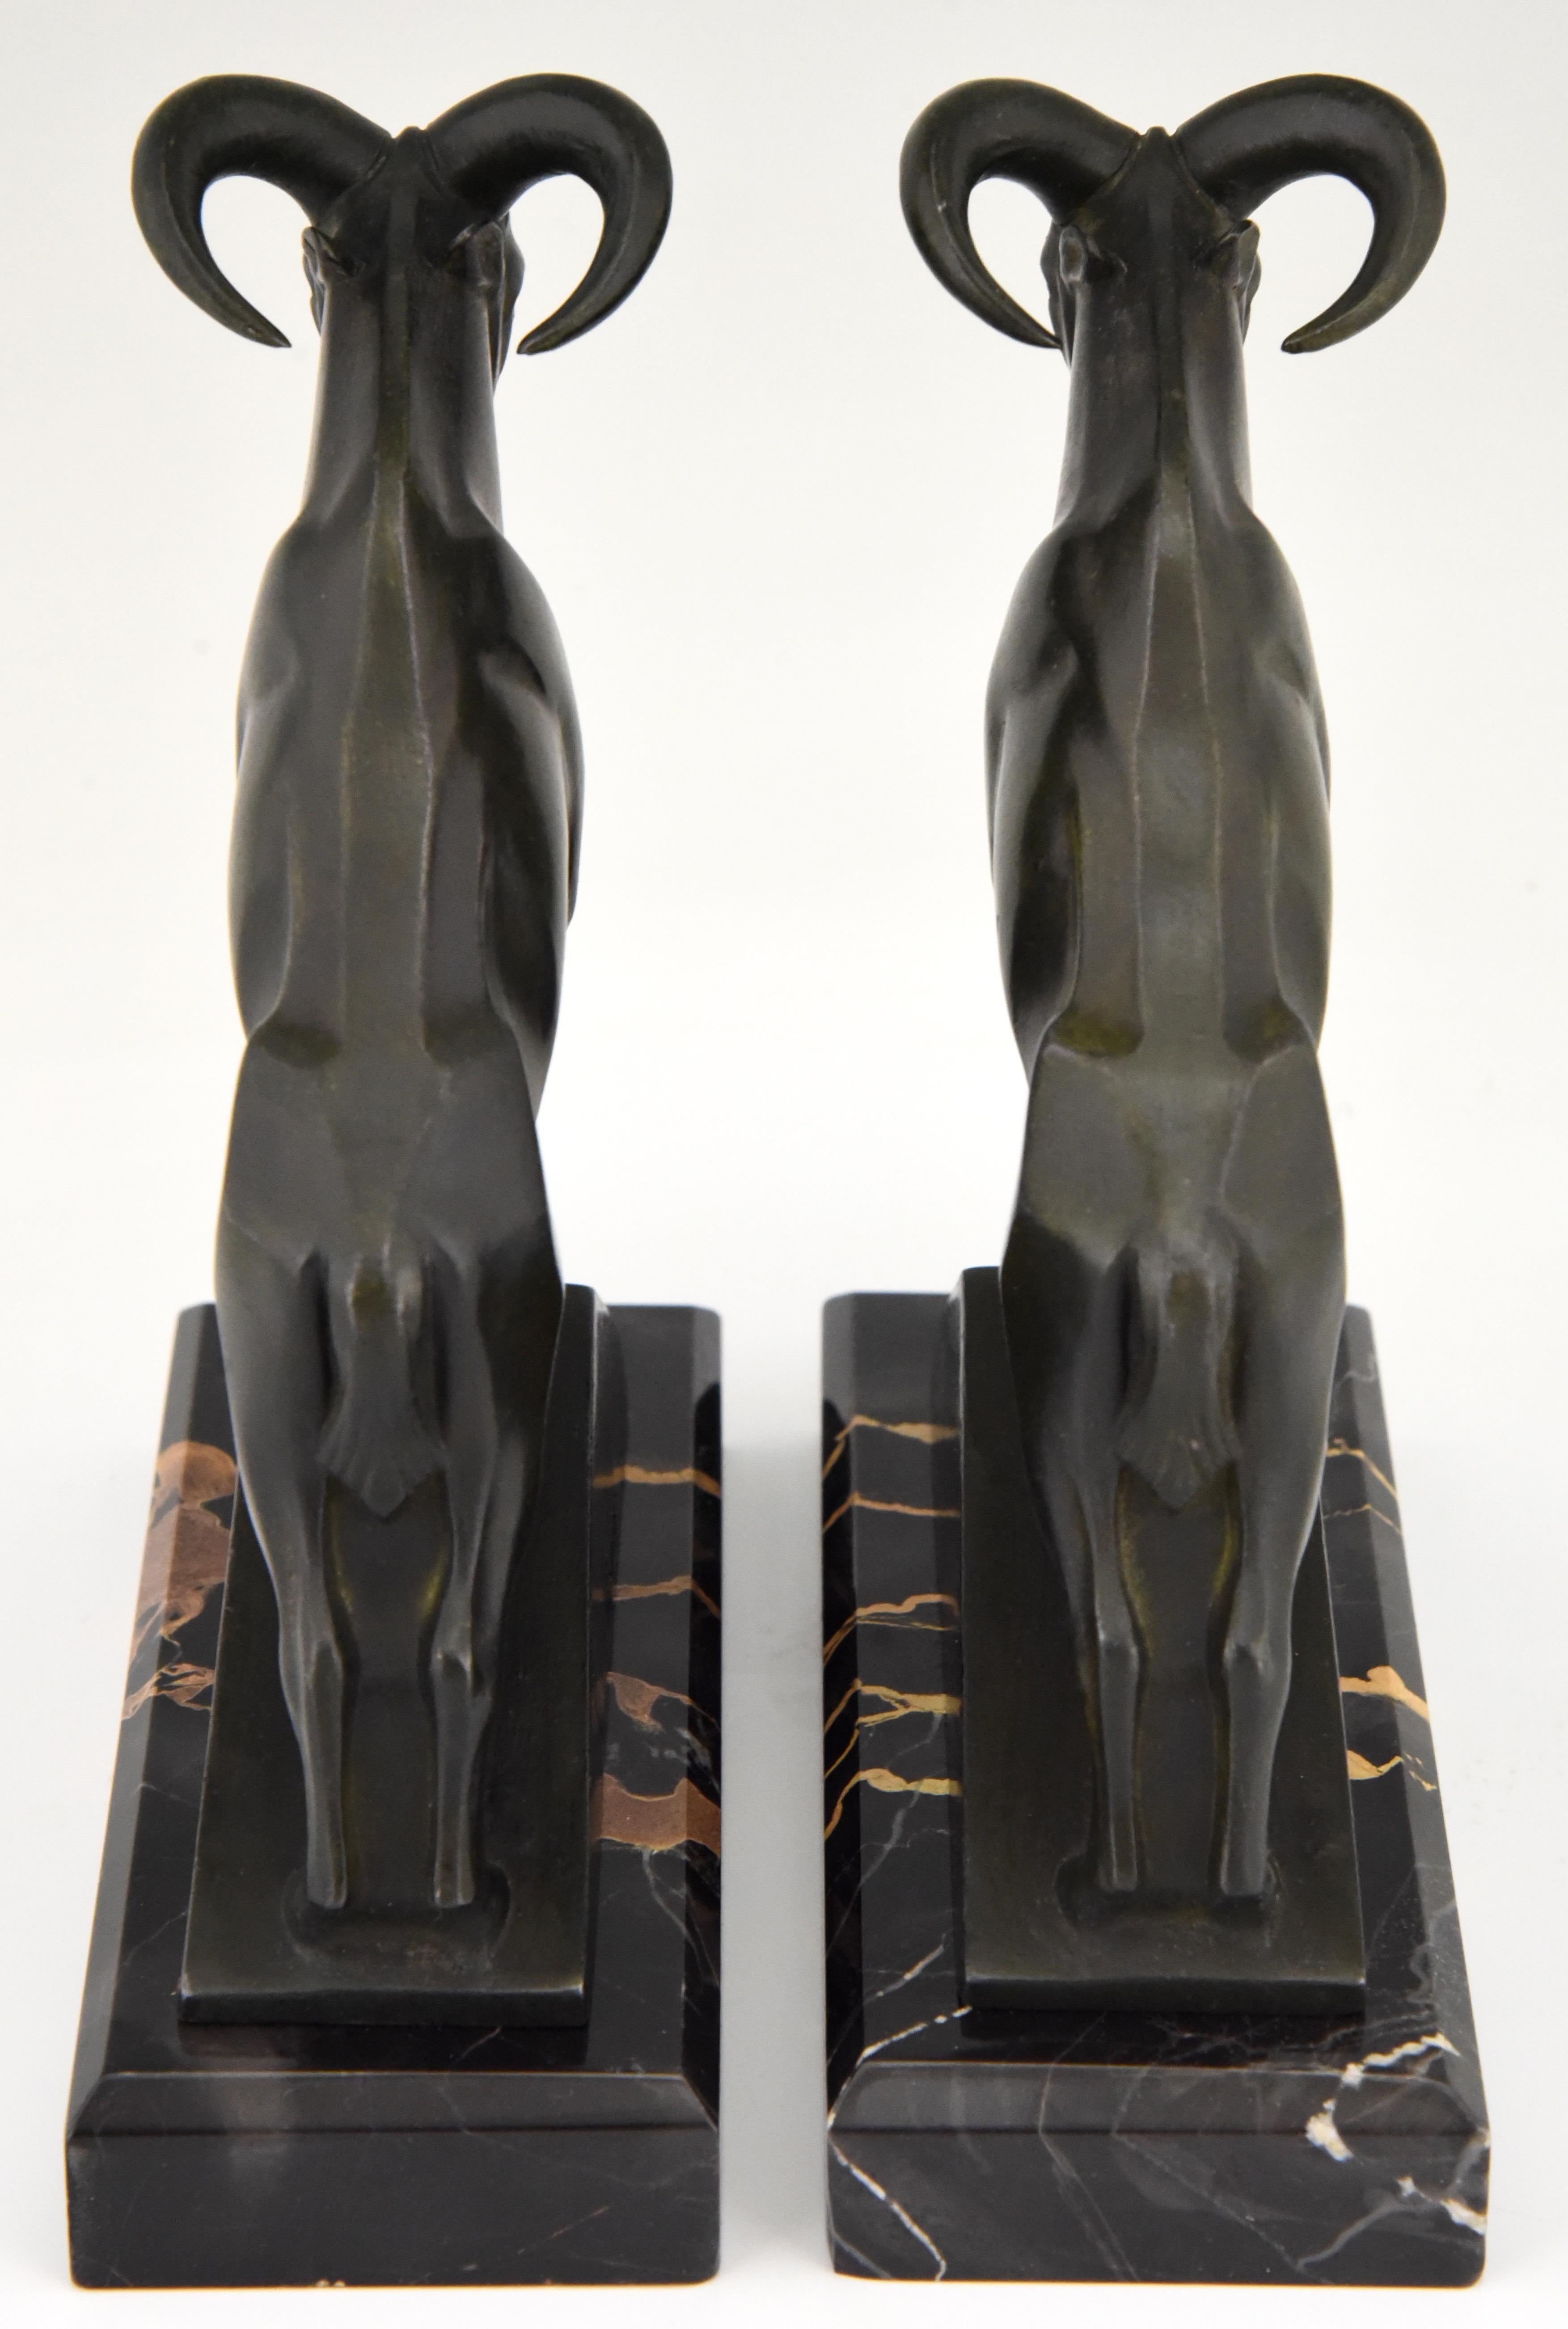 French Art Deco Ibex or Ram Bookends Max Le Verrier France 1930 Original